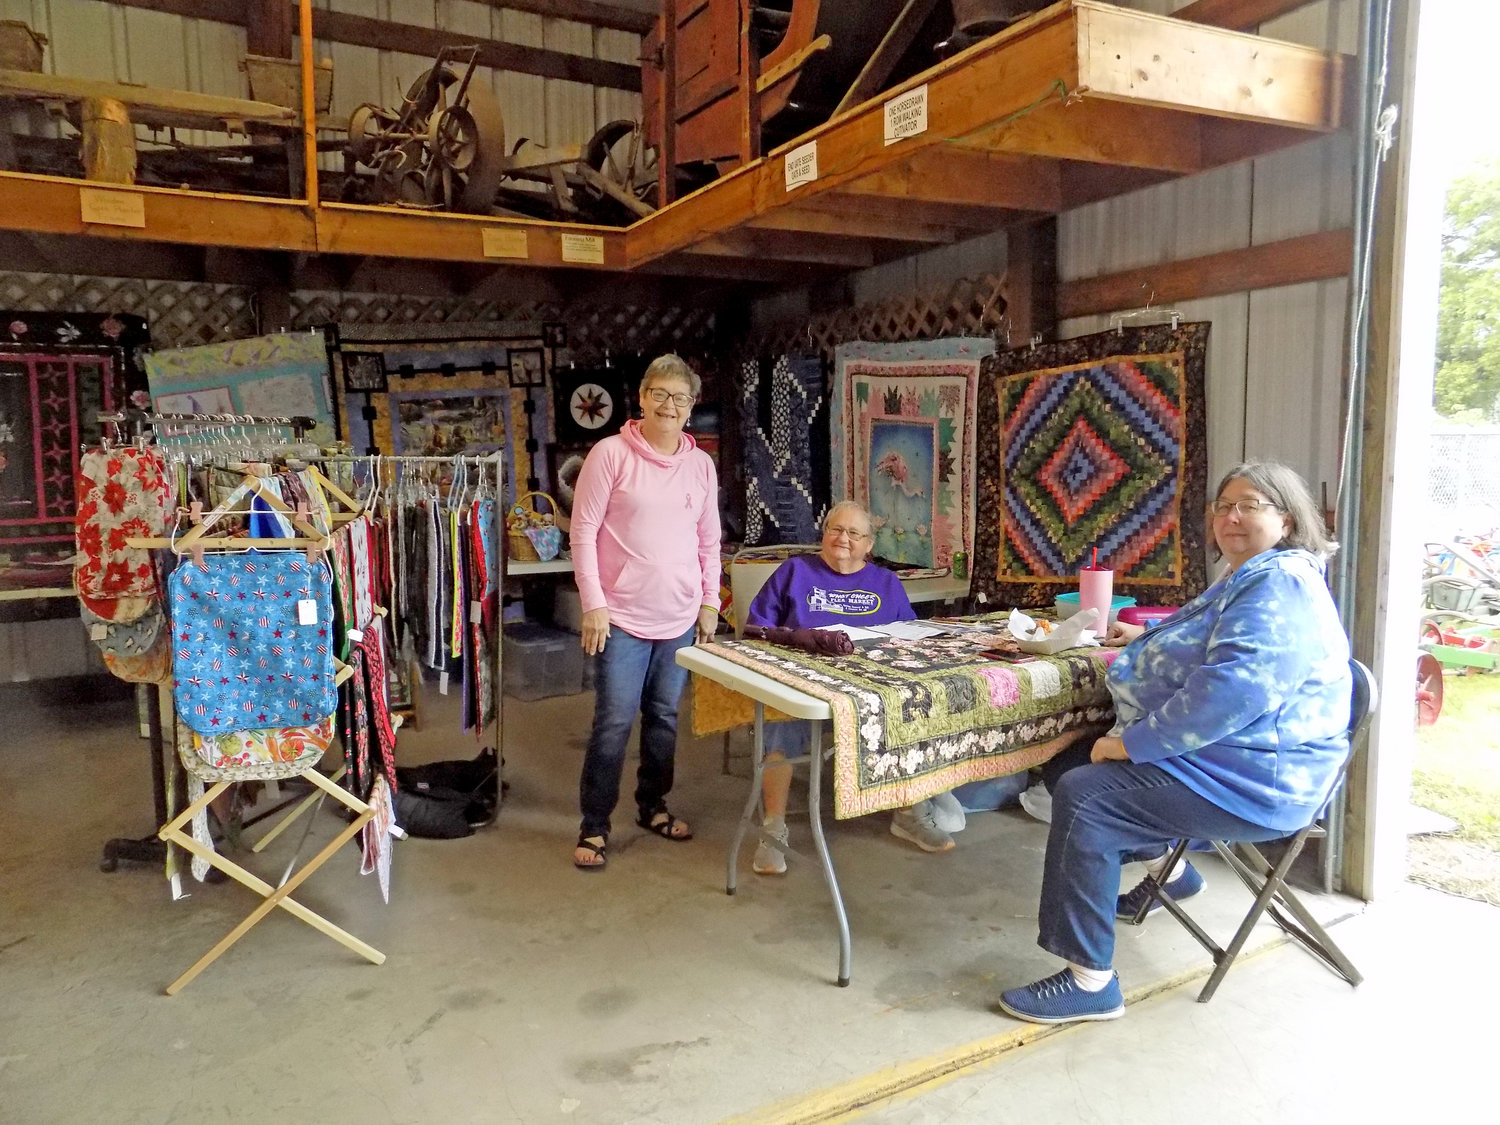 Joyce Schrock, Ann Yotty, and Colette Yoder sold colorful quilts, table linens, washcloths, and bowl cozies inside the Ag Museum.